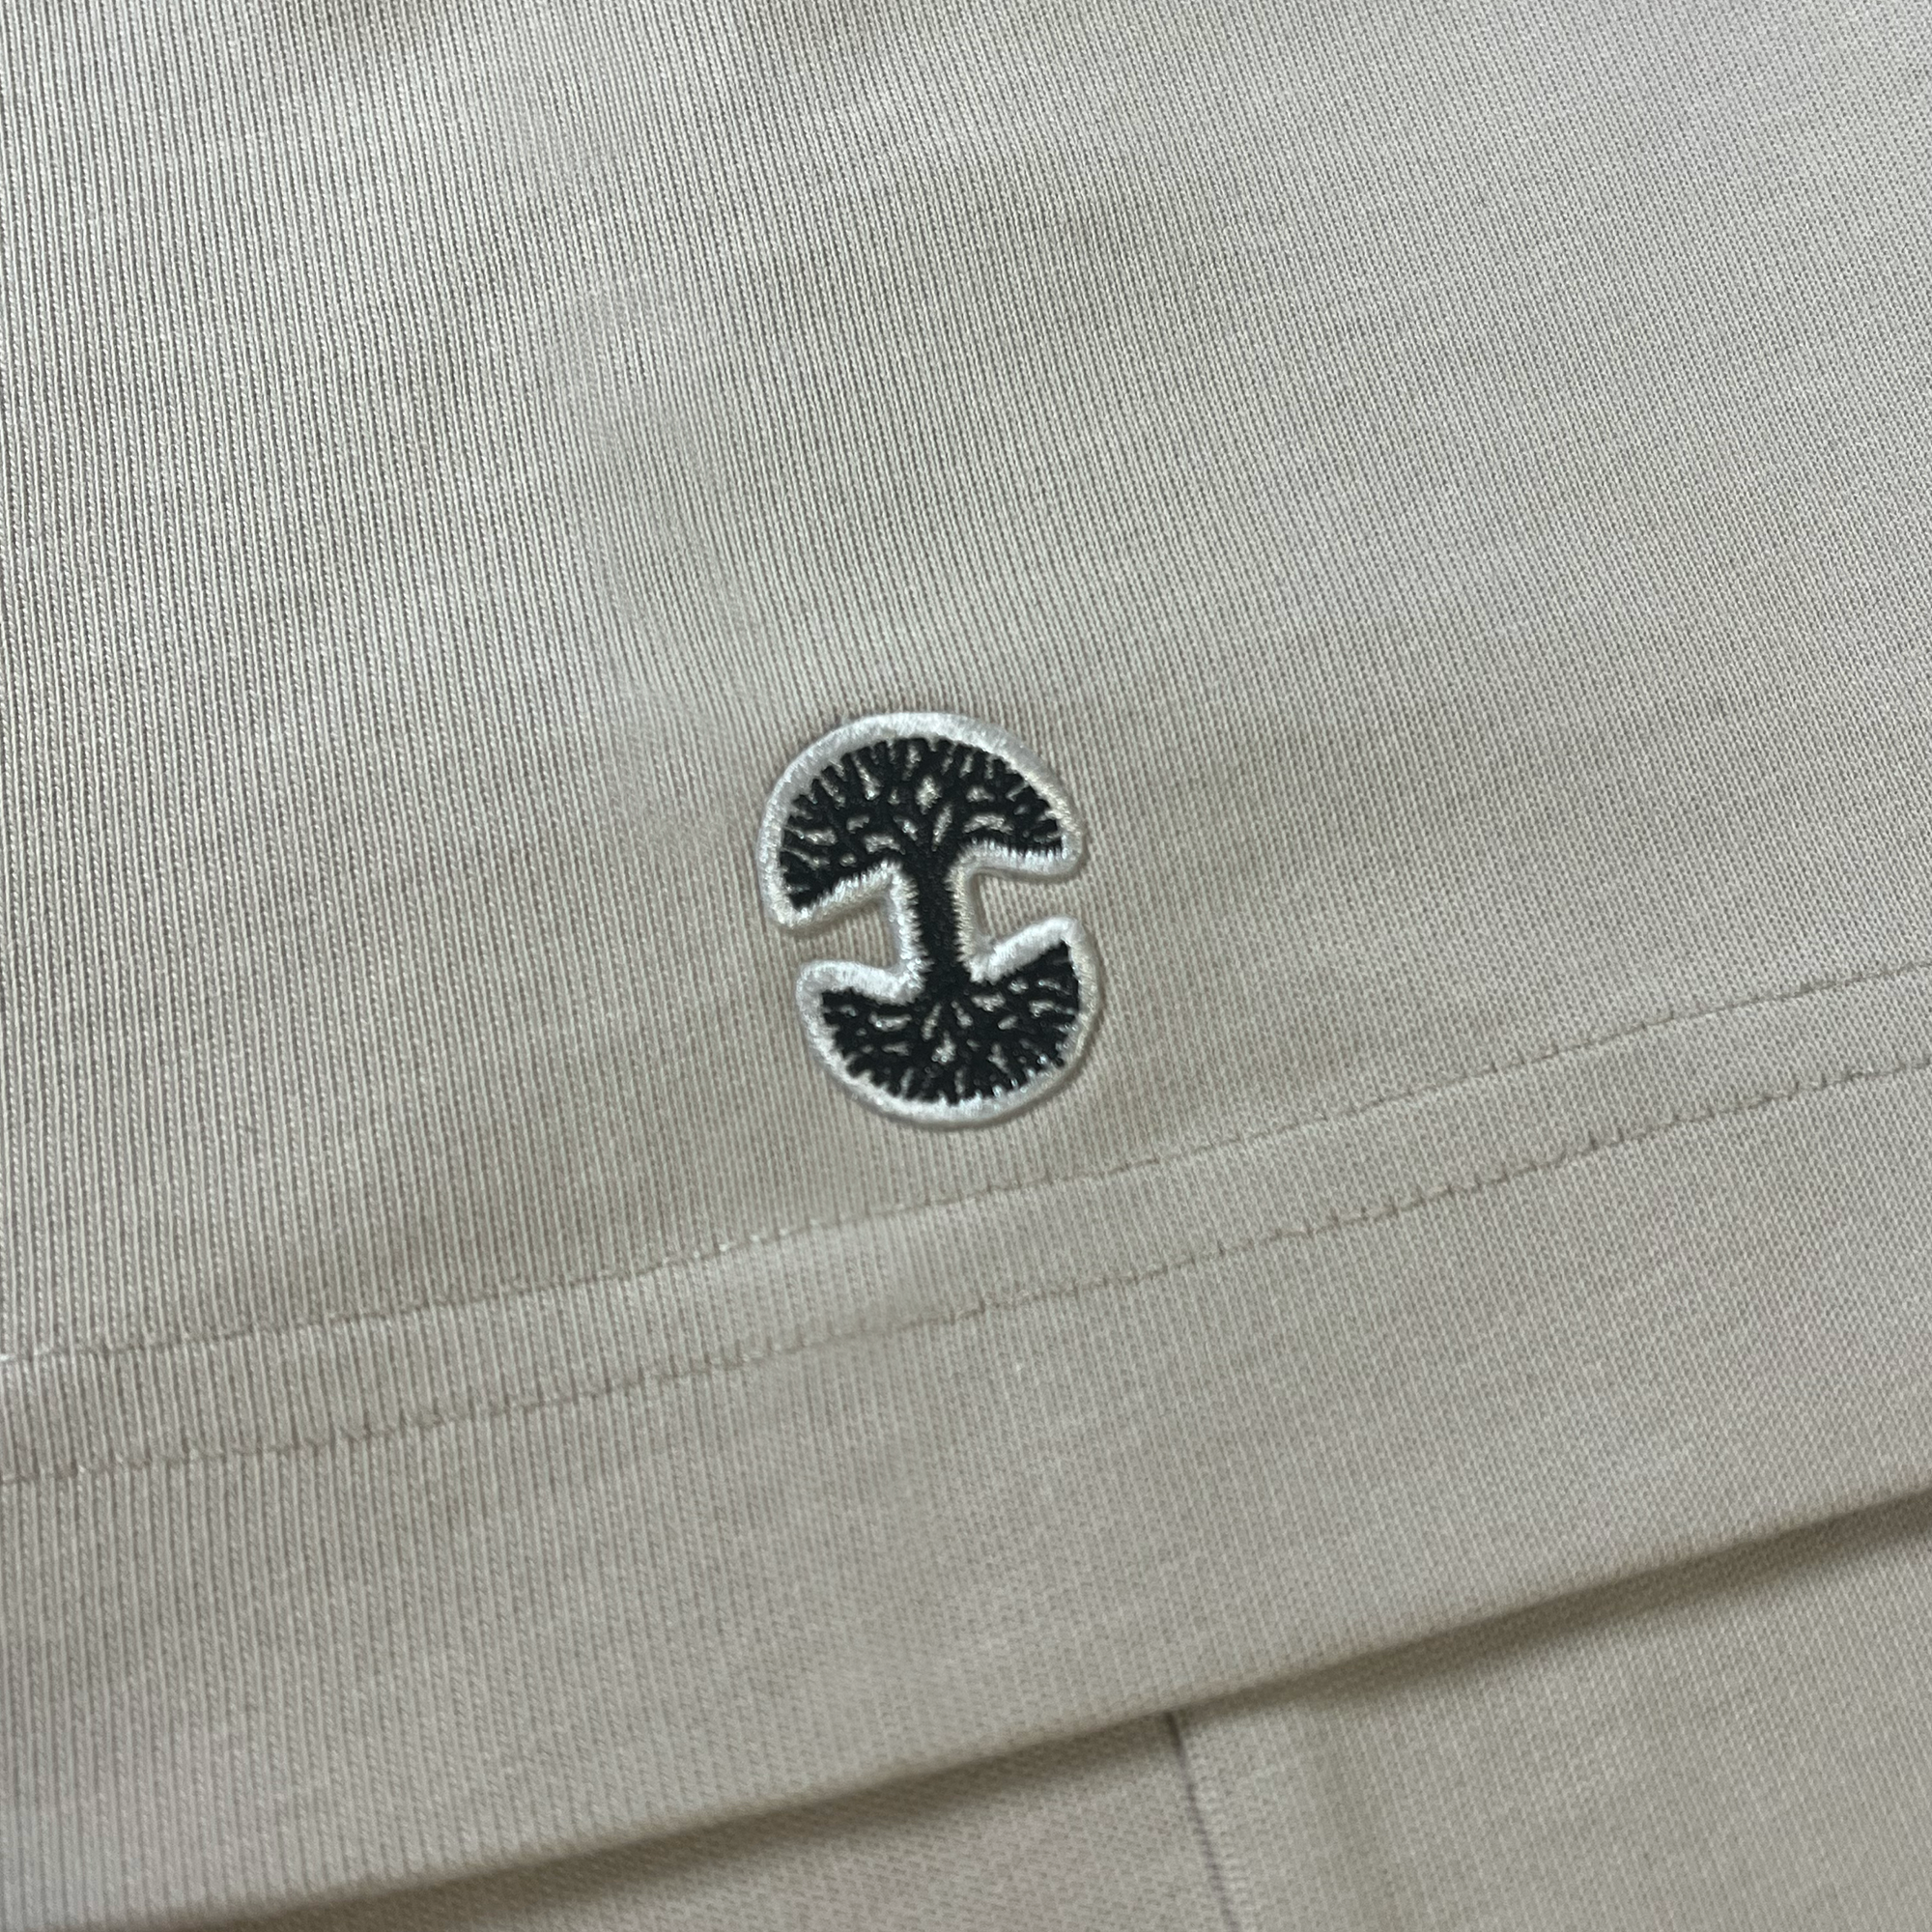 Detailed close up of Oaklandish tree logo patch on the sleeve of a bone-colored baseball jersey.